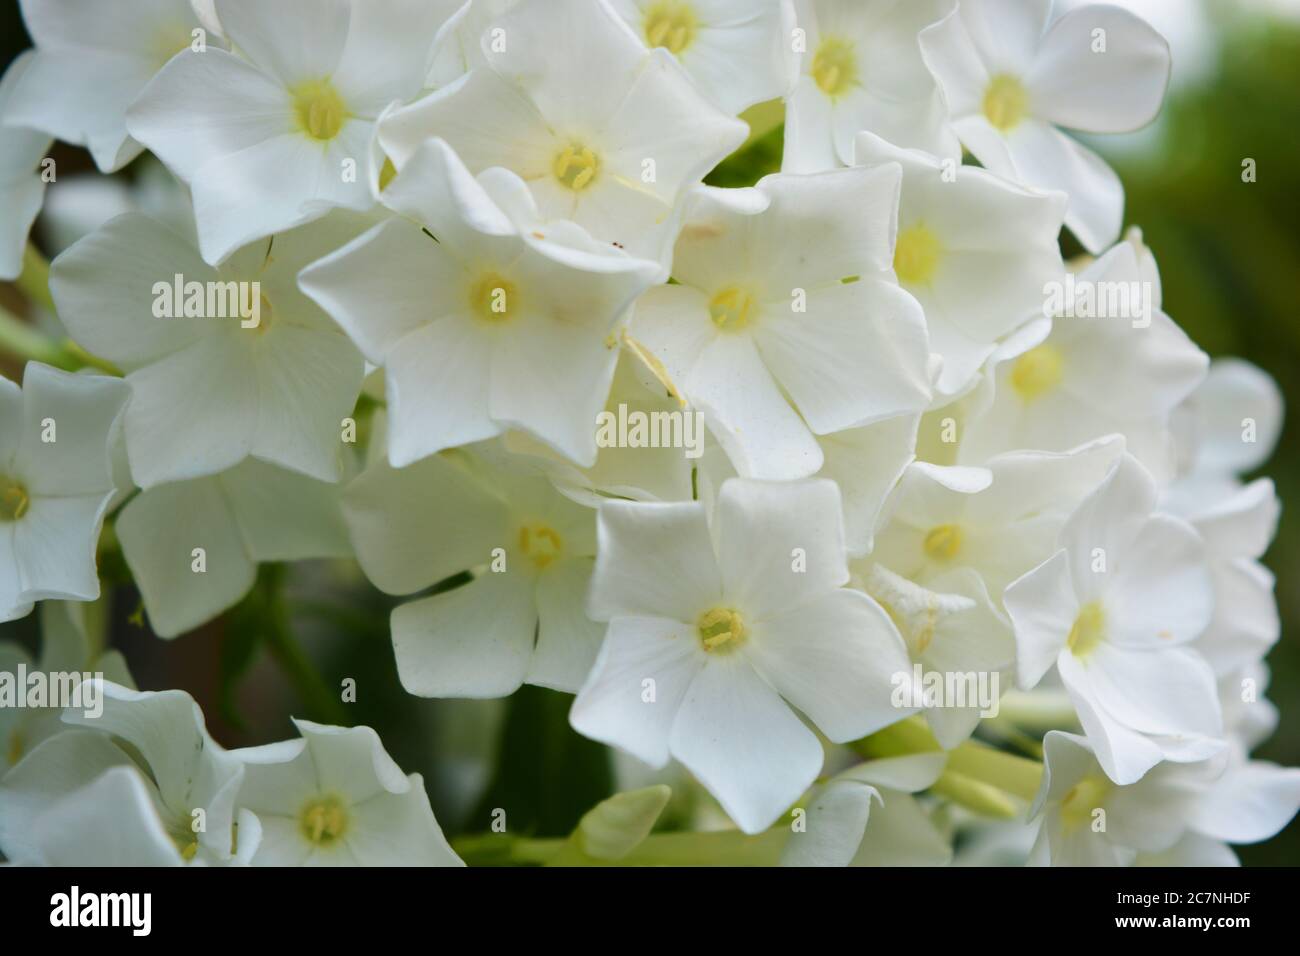 White bright and colorful street flowers, white phlox that grows in the garden. Stock Photo